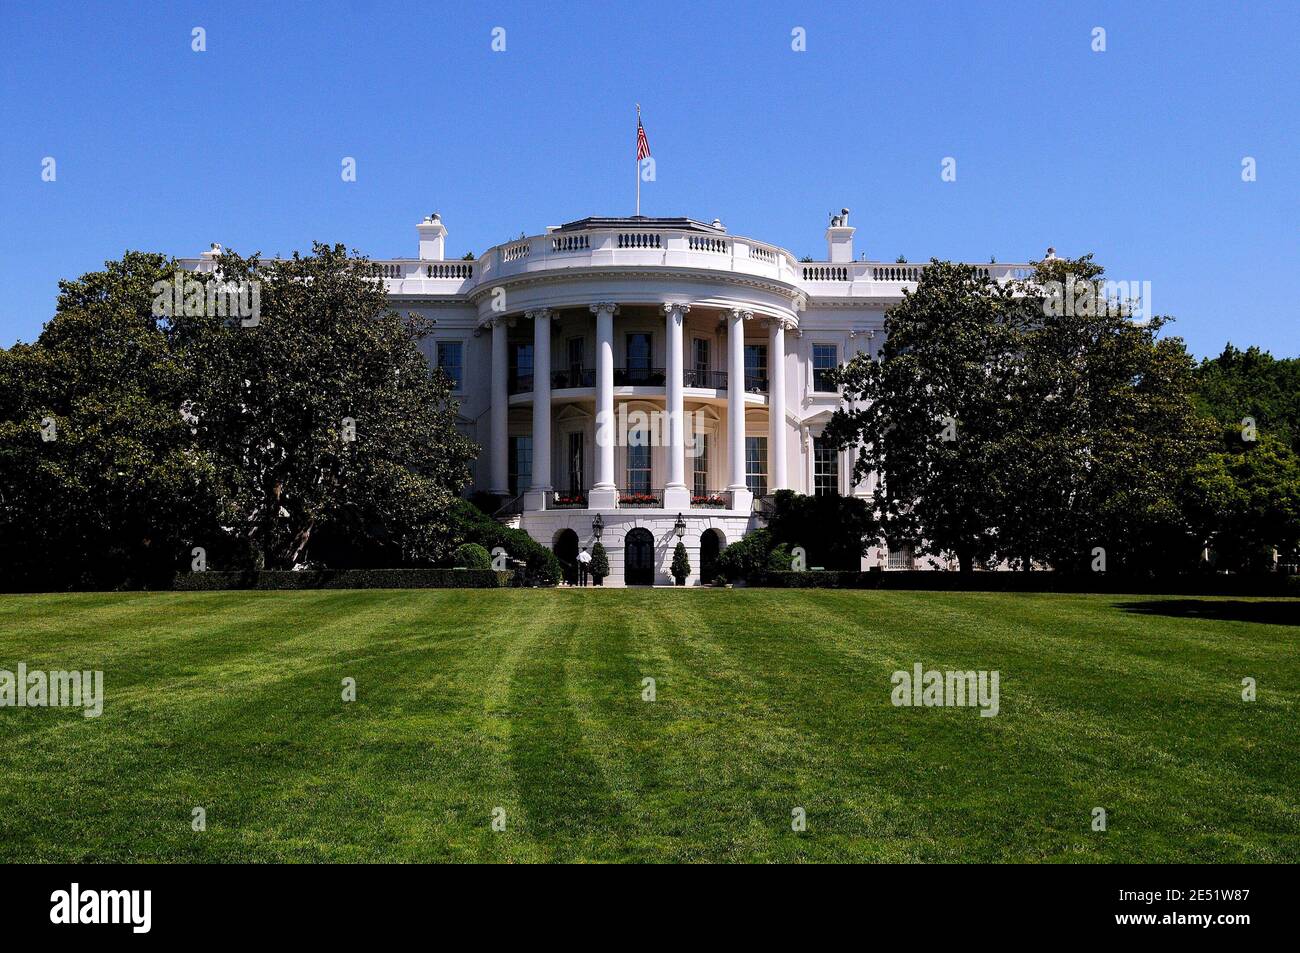 View of the White House from the South Lawn, six months before the Presidential elections in Washington, DC, USA, on May 26 2008. Photo by Olivier Douliery/ABACAPRESS.COM Stock Photo